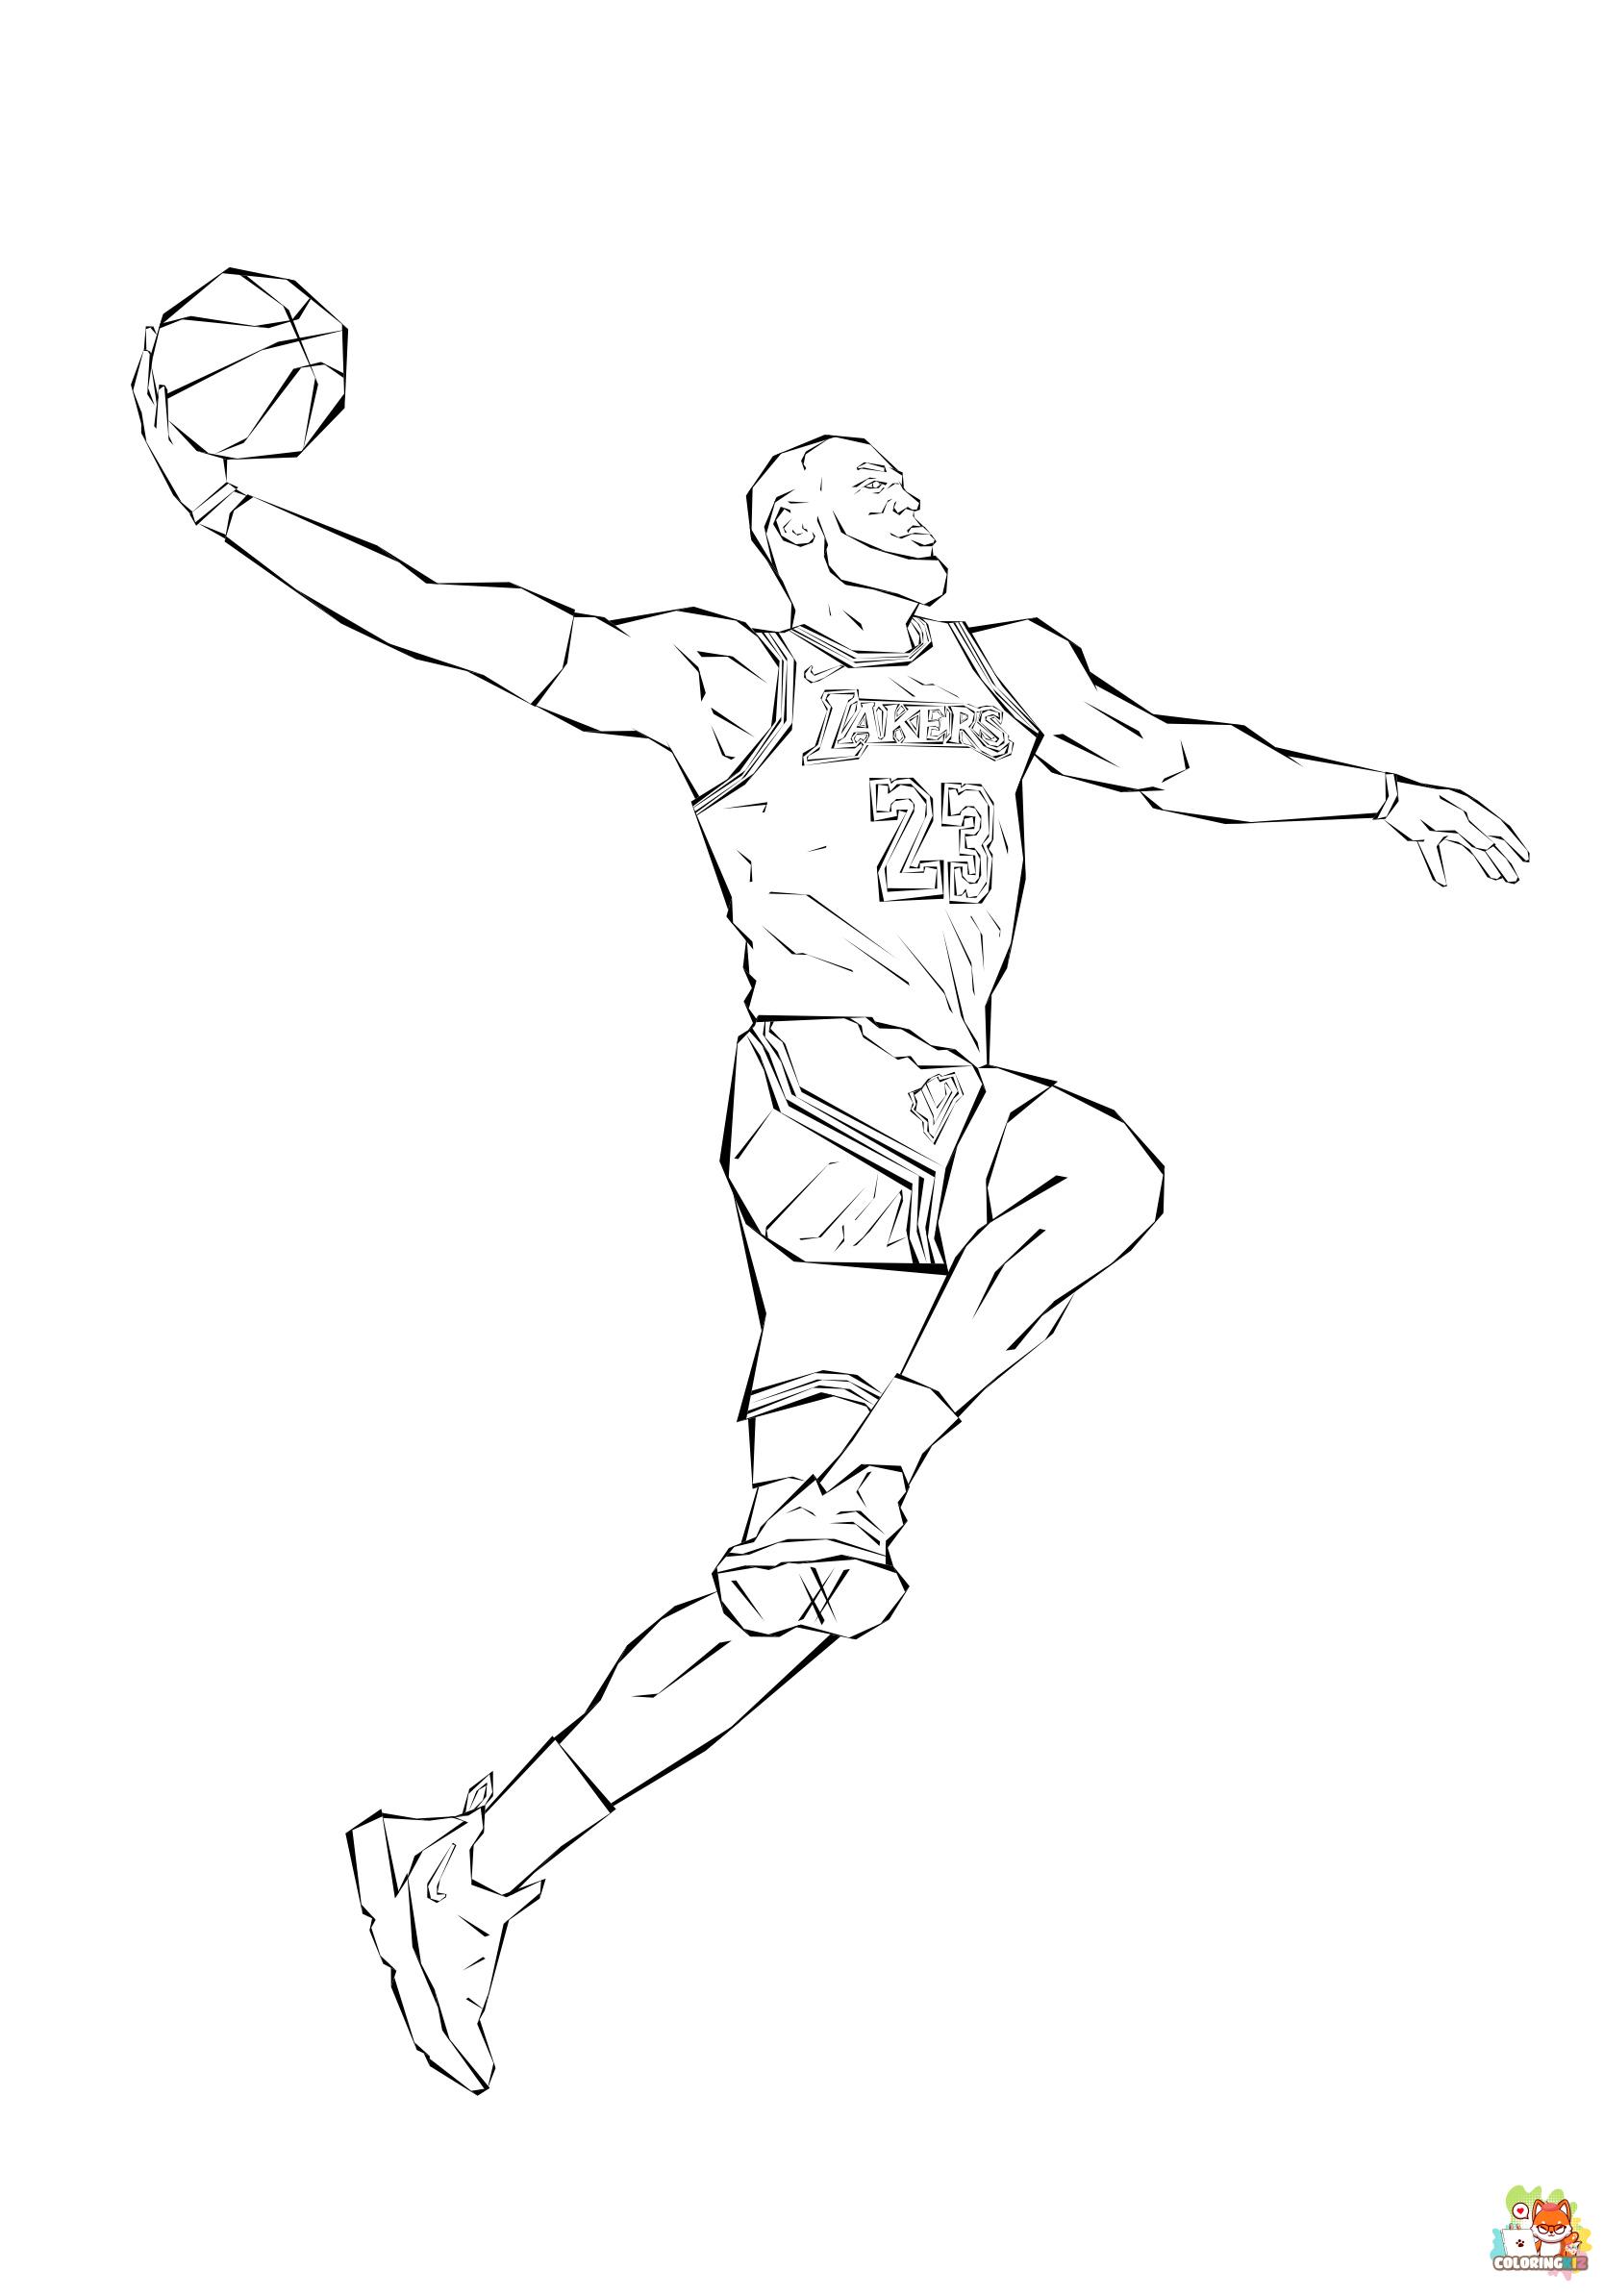 Free lebron james coloring pages for kids